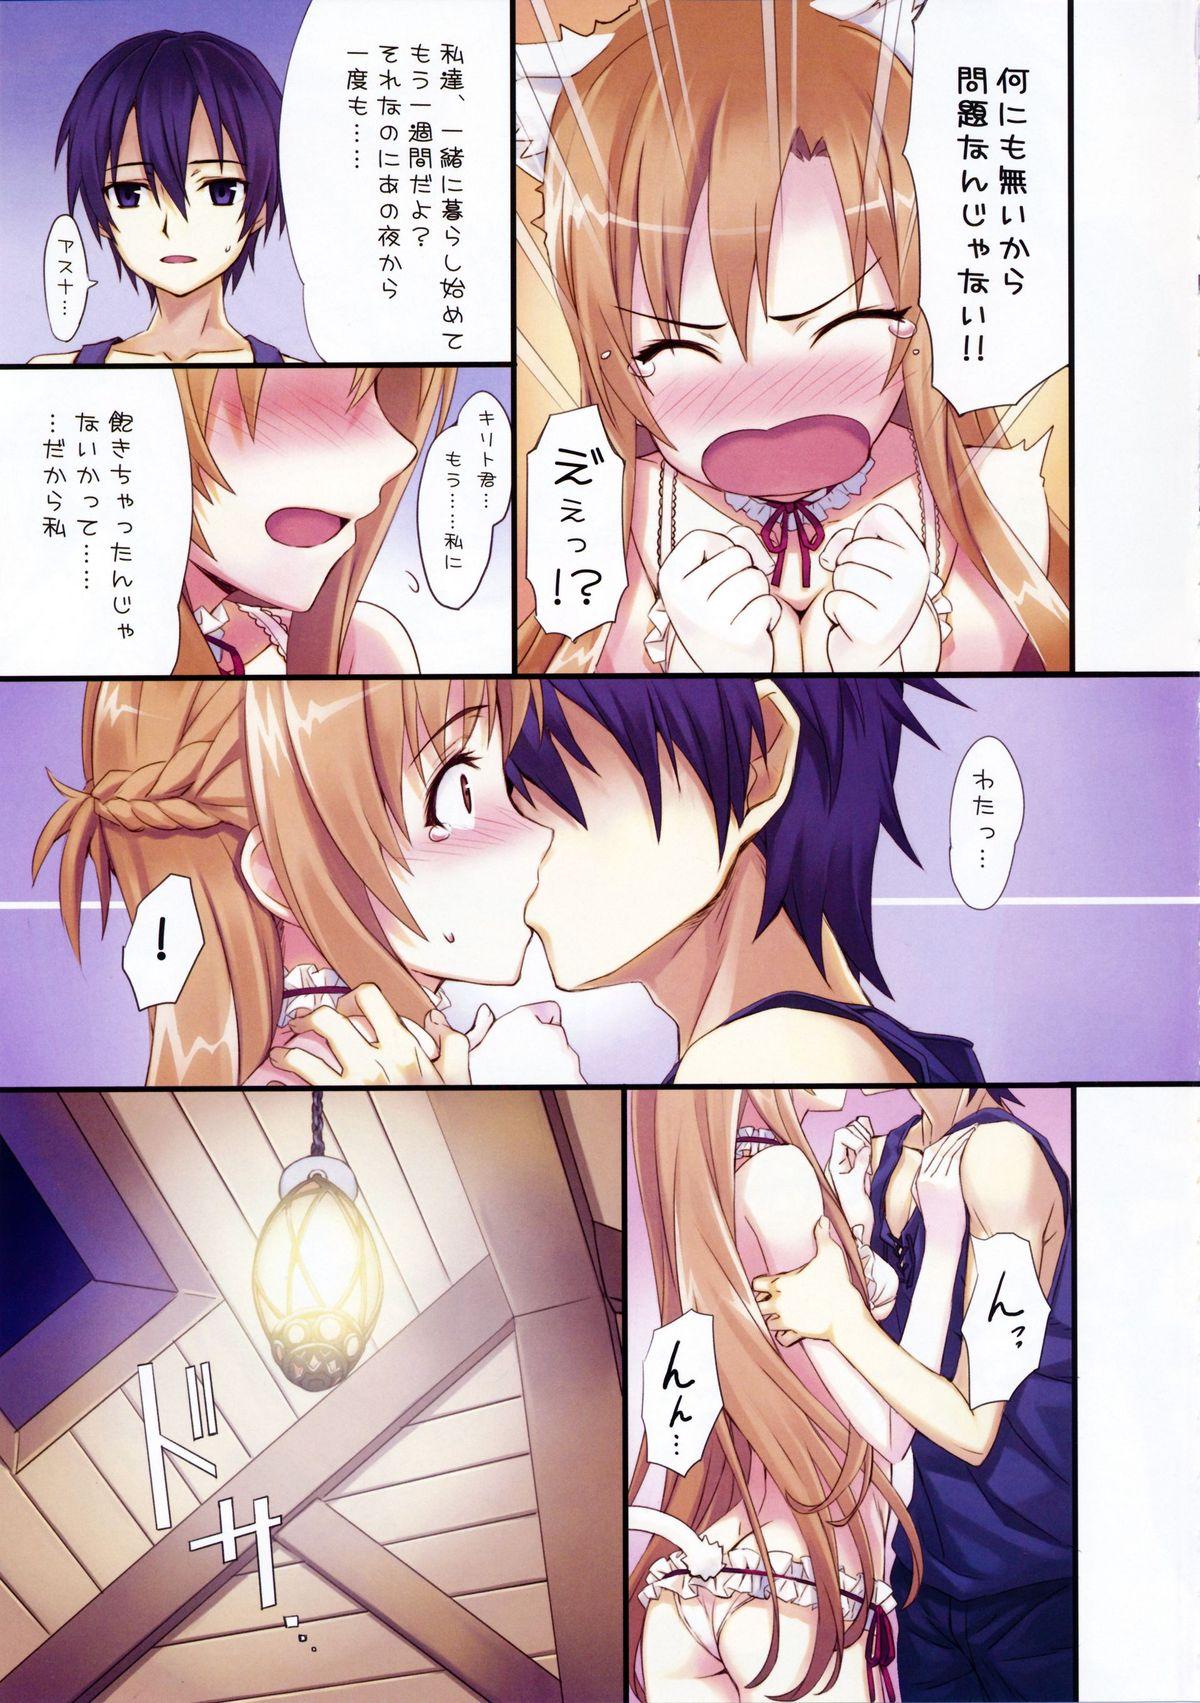 Fuck Pussy Sword Art Extra - Sword art online Licking - Page 6